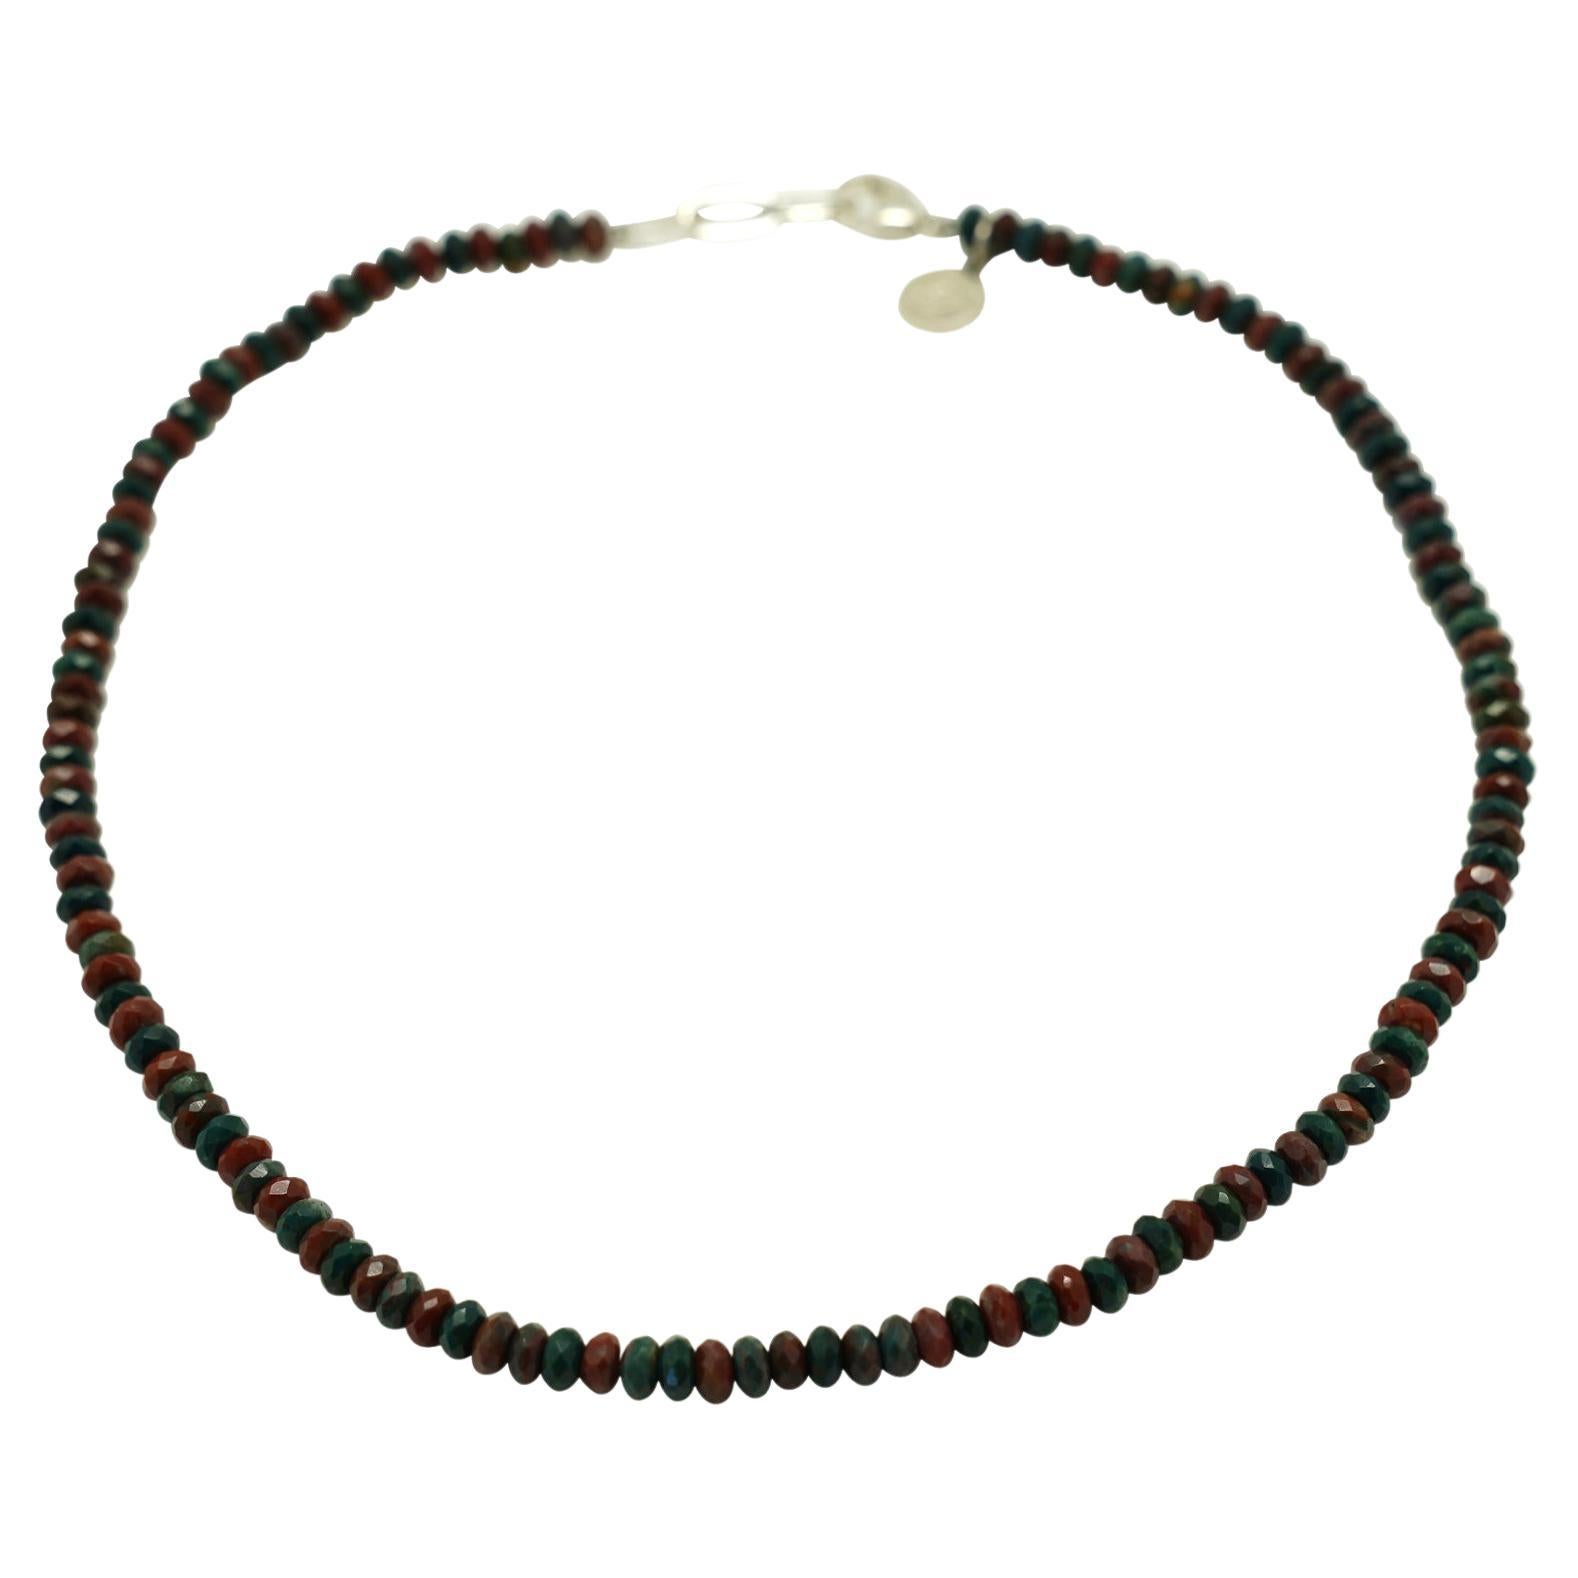 Purity Bloodstone Necklace For Sale